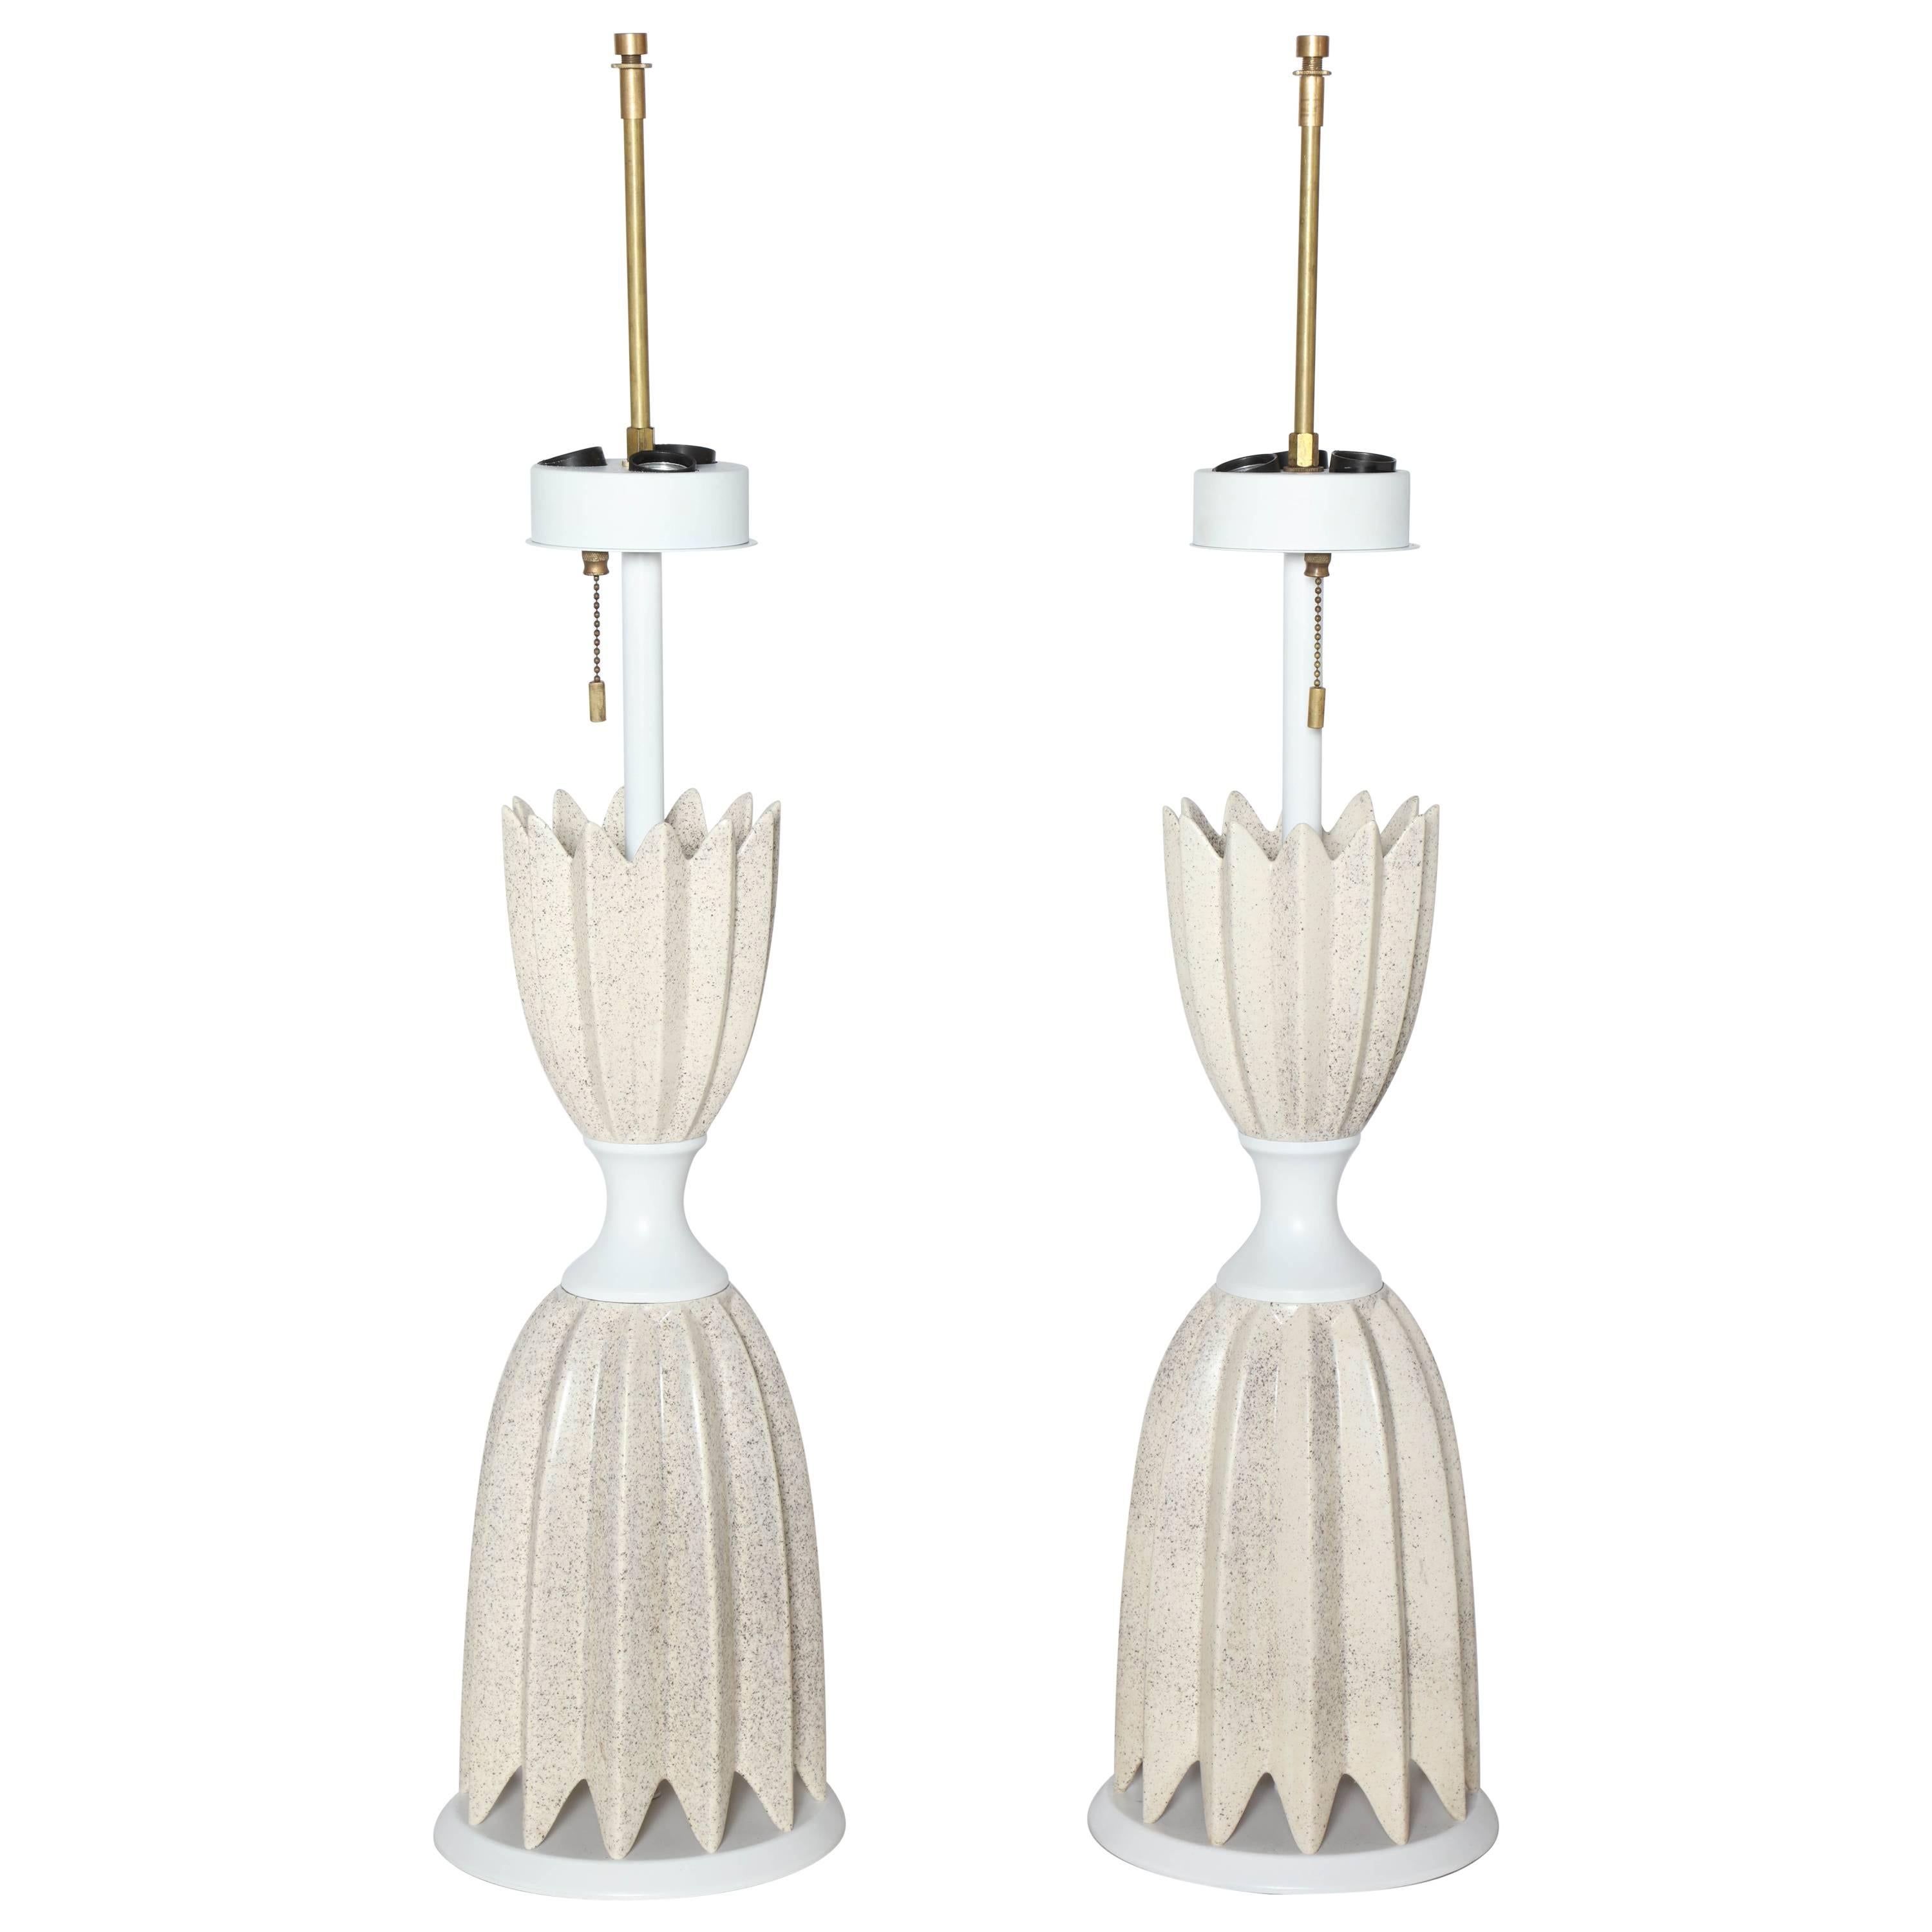 Monumental Pair of Gerald Thurston for Lightolier Neutral Ceramic Table Lamps.  Featuring an abstract hourglass shape, in natural, Cream, Sand, Eggshell Ceramic accentuated with Dark Brown speckled glaze. White enameled metal neck, waist and round